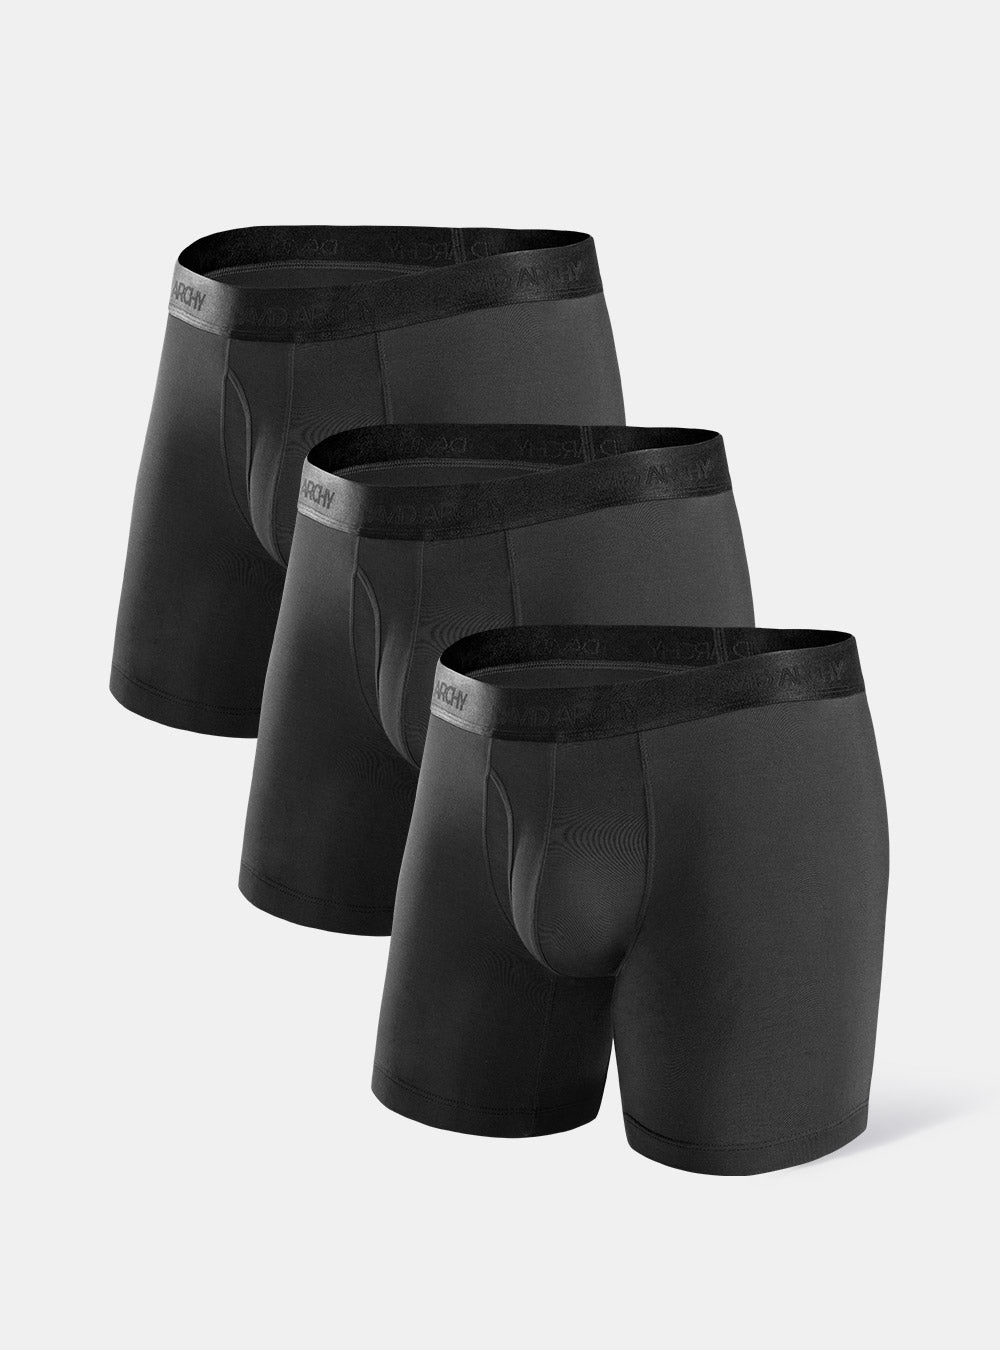 David Archy 3 Packs Boxer Briefs With Fly No-Ride Up Comfy Silky